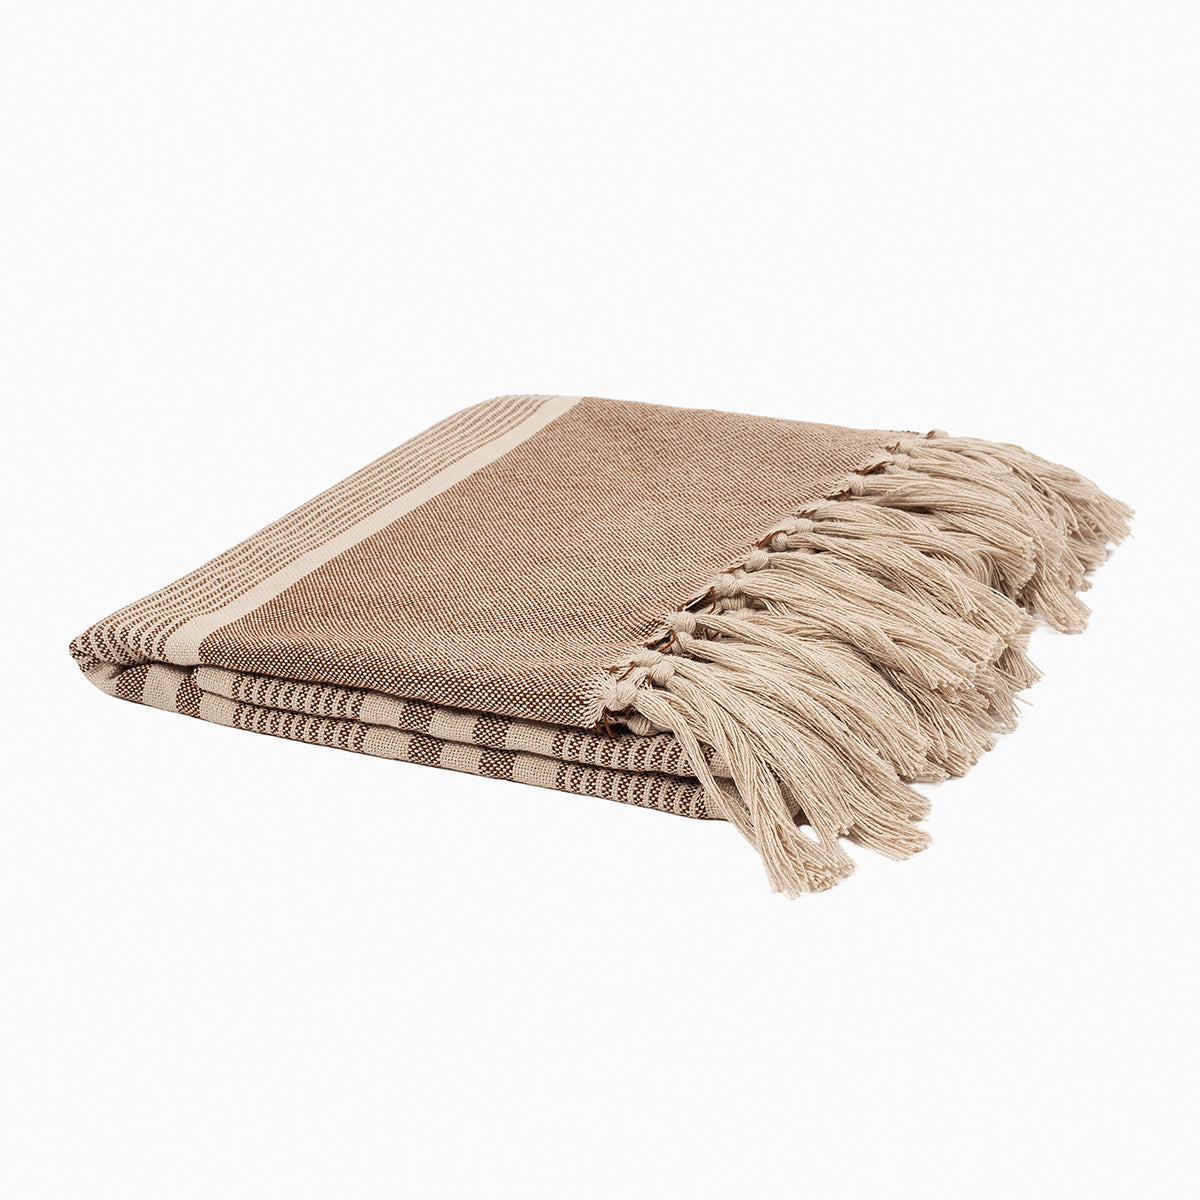 Brown and Beige Outdoor Throw Blanket | Product Detail Image | Uncommon James Home